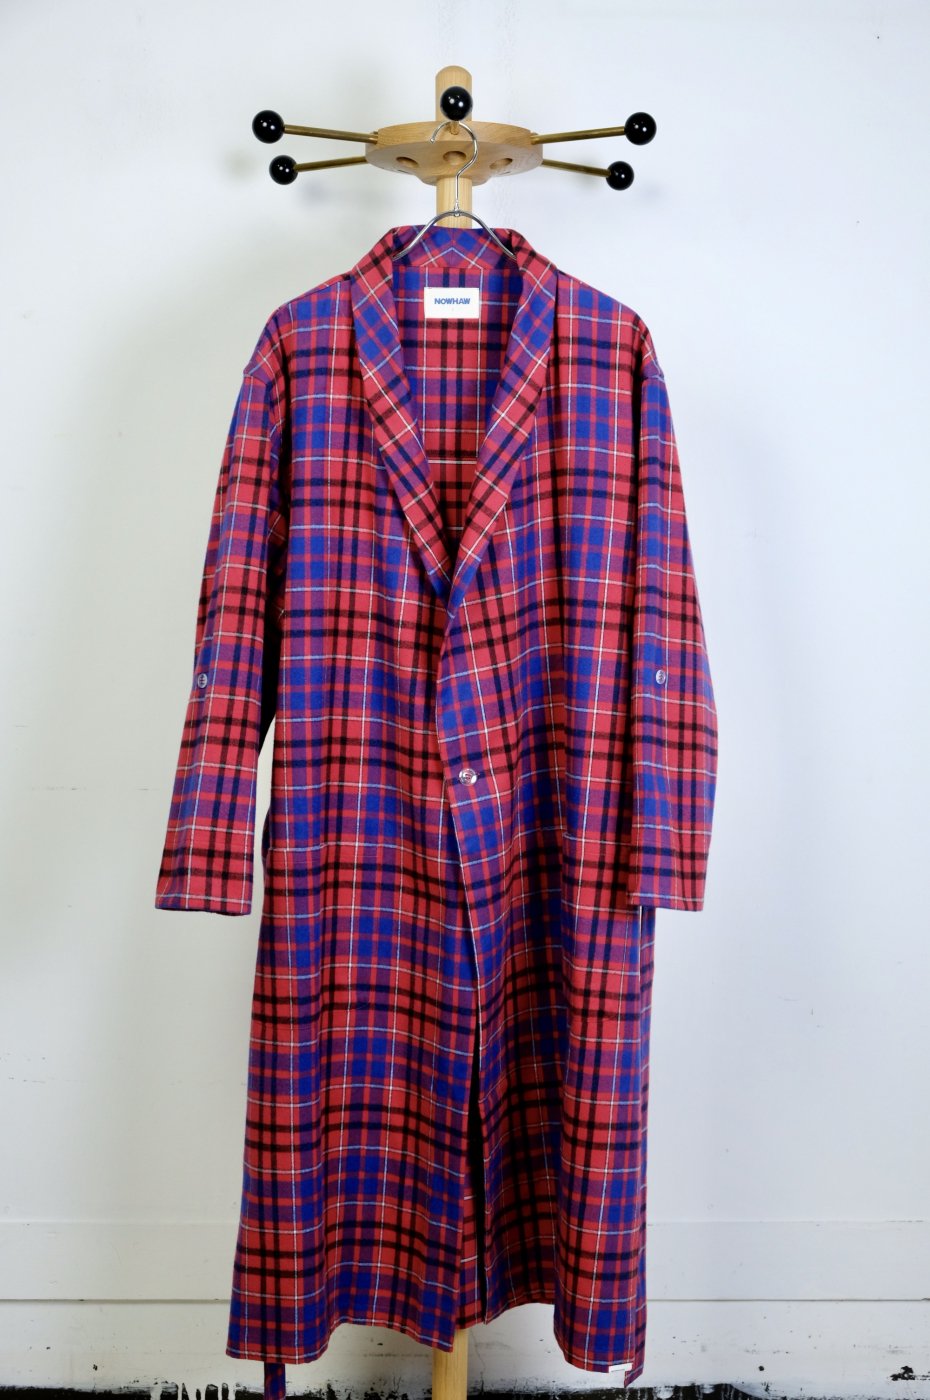 NOWHAW "MOOD GOWN TARTAN"